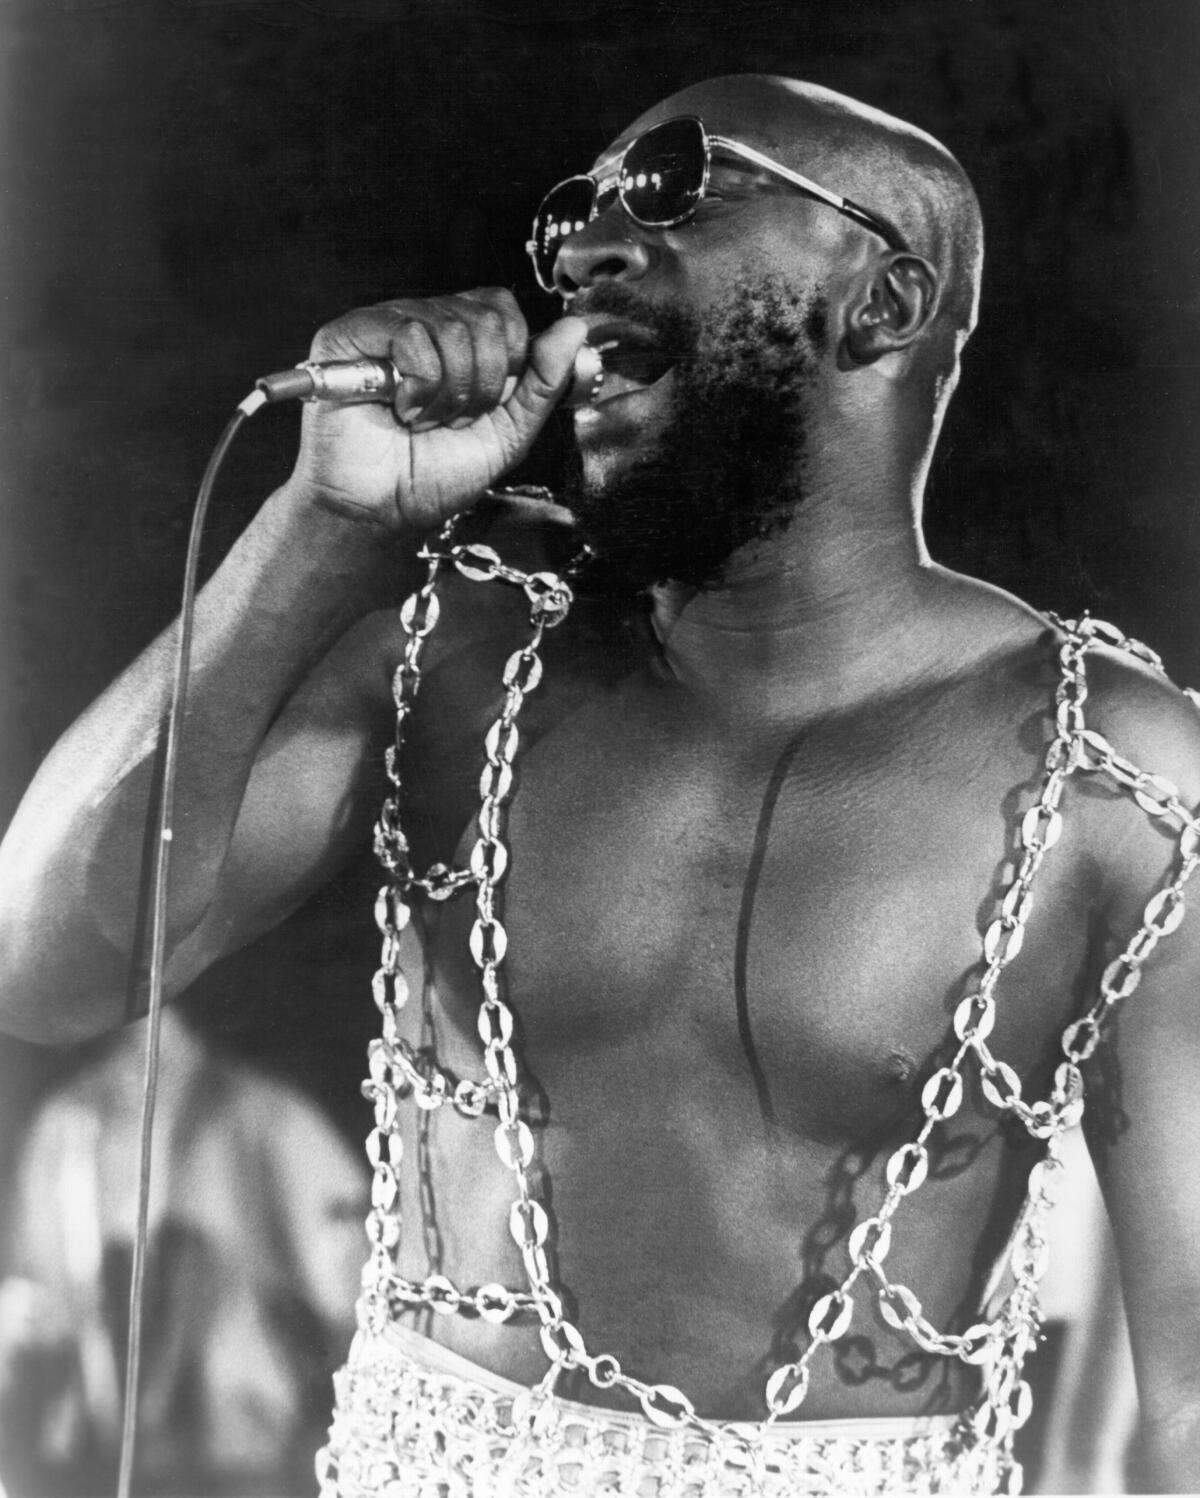 A Black singer performs onstage wearing chains for a shirt